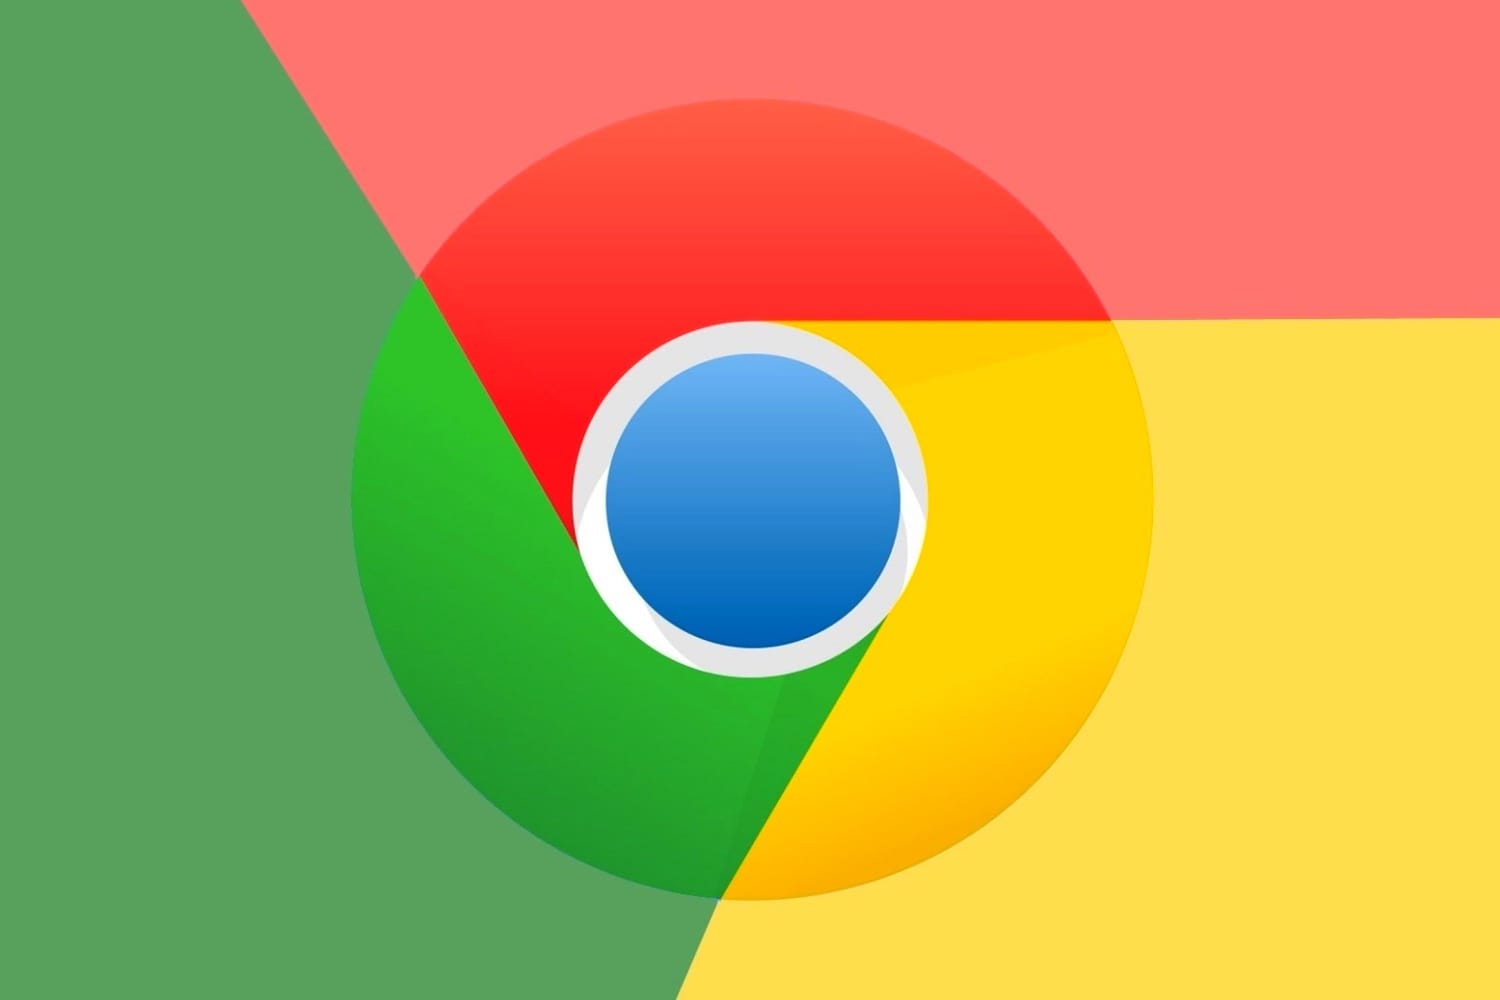 Download scheduler may soon come to Google Chrome for Android